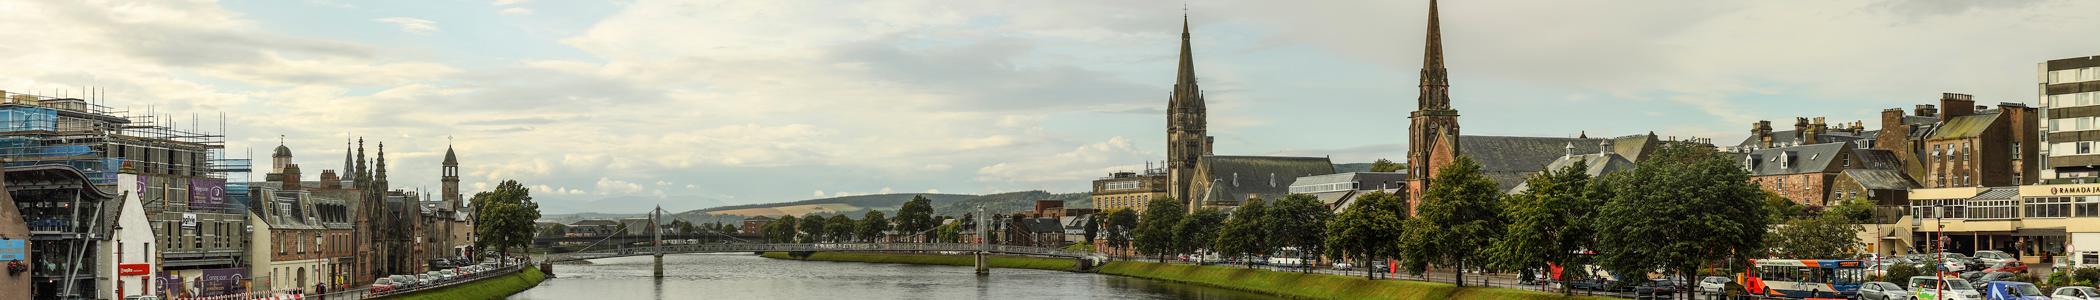 Banner image for Inverness on GigsGuide